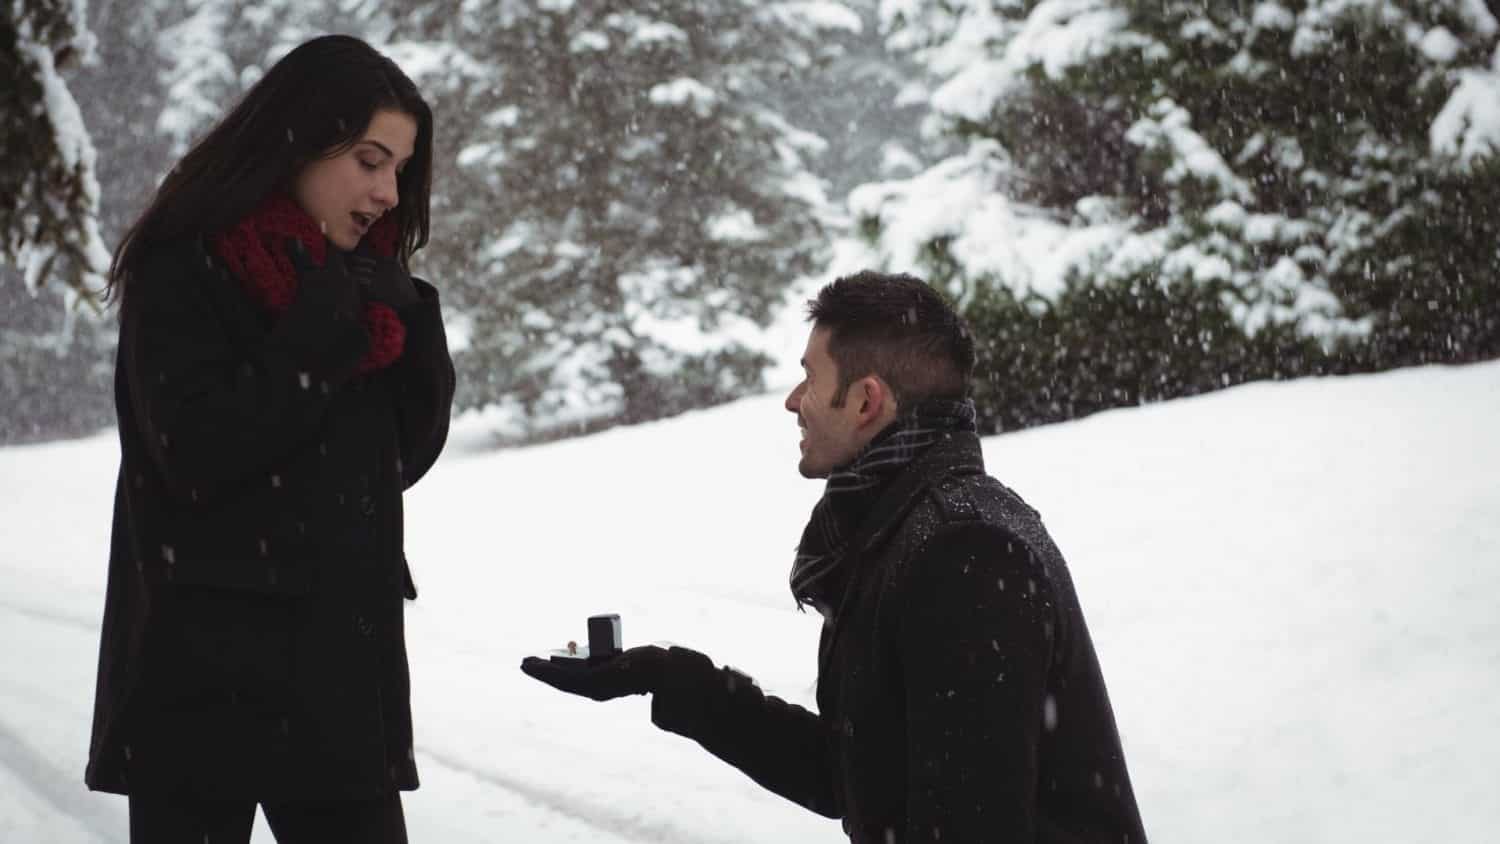 A man proposes to a woman in front of a snowy backdrop.